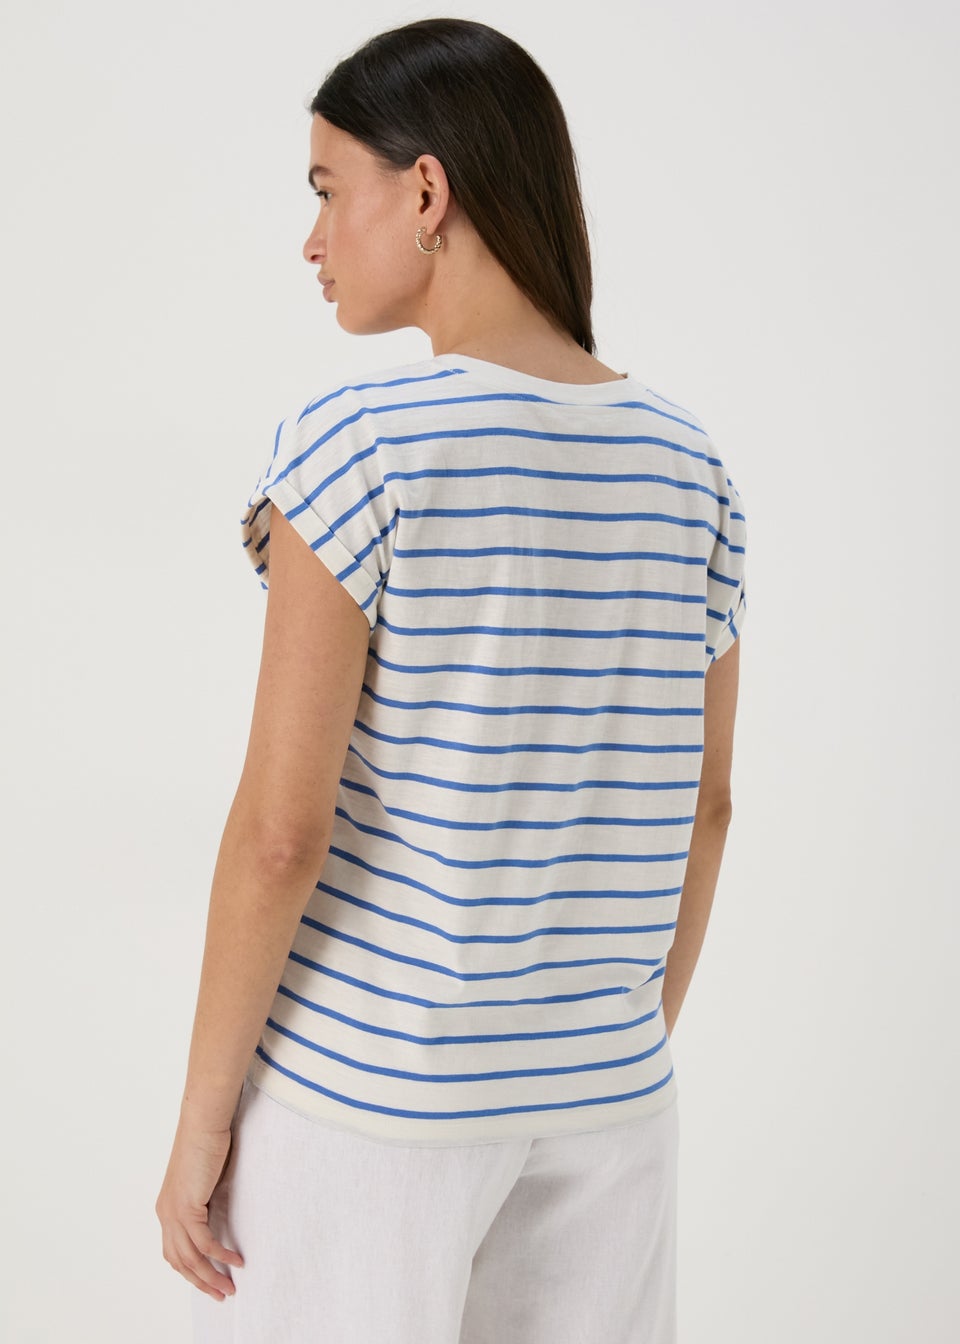 Cream & Blue Stripe Relaxed Fit T-Shirt